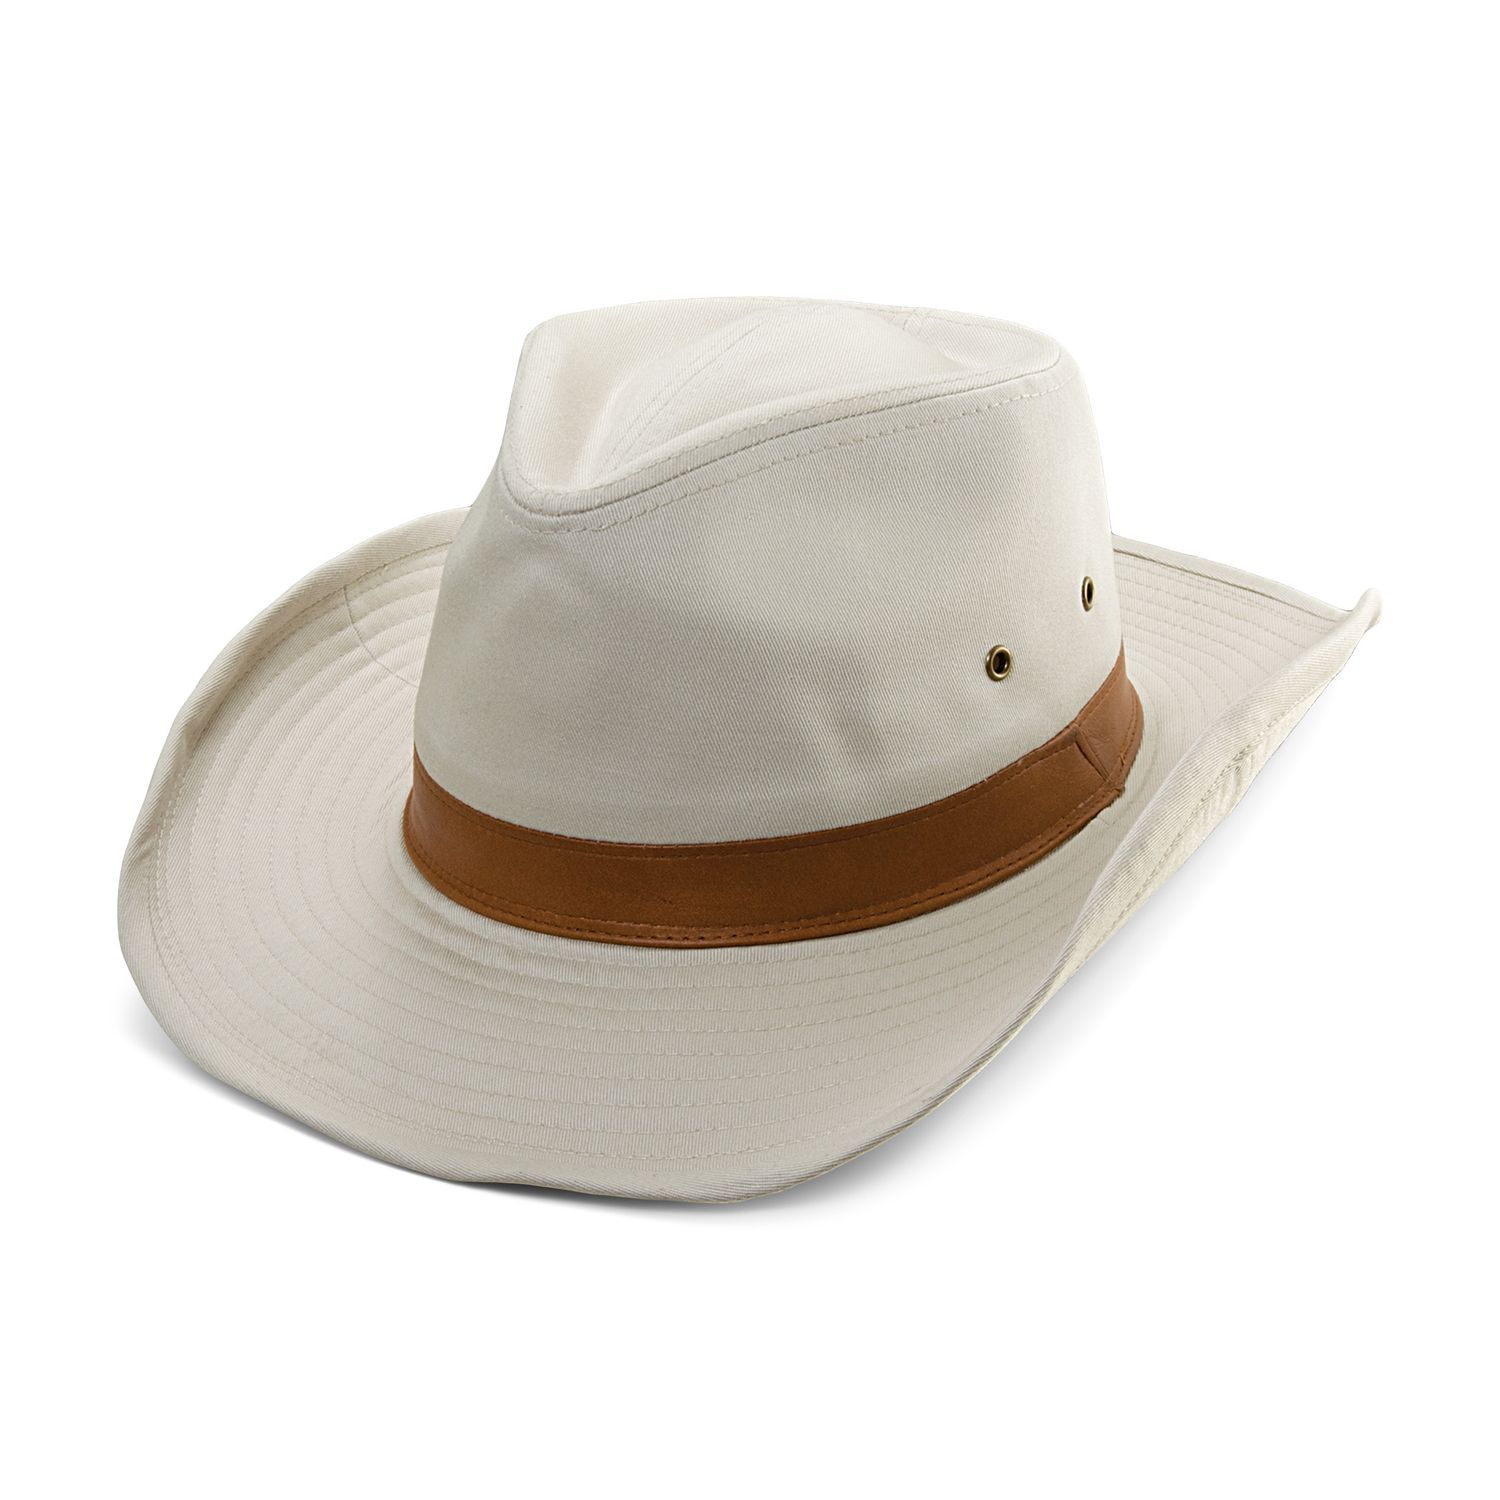 Image for DPC Men's Garment-Washed Twill Hat at Kohl's.